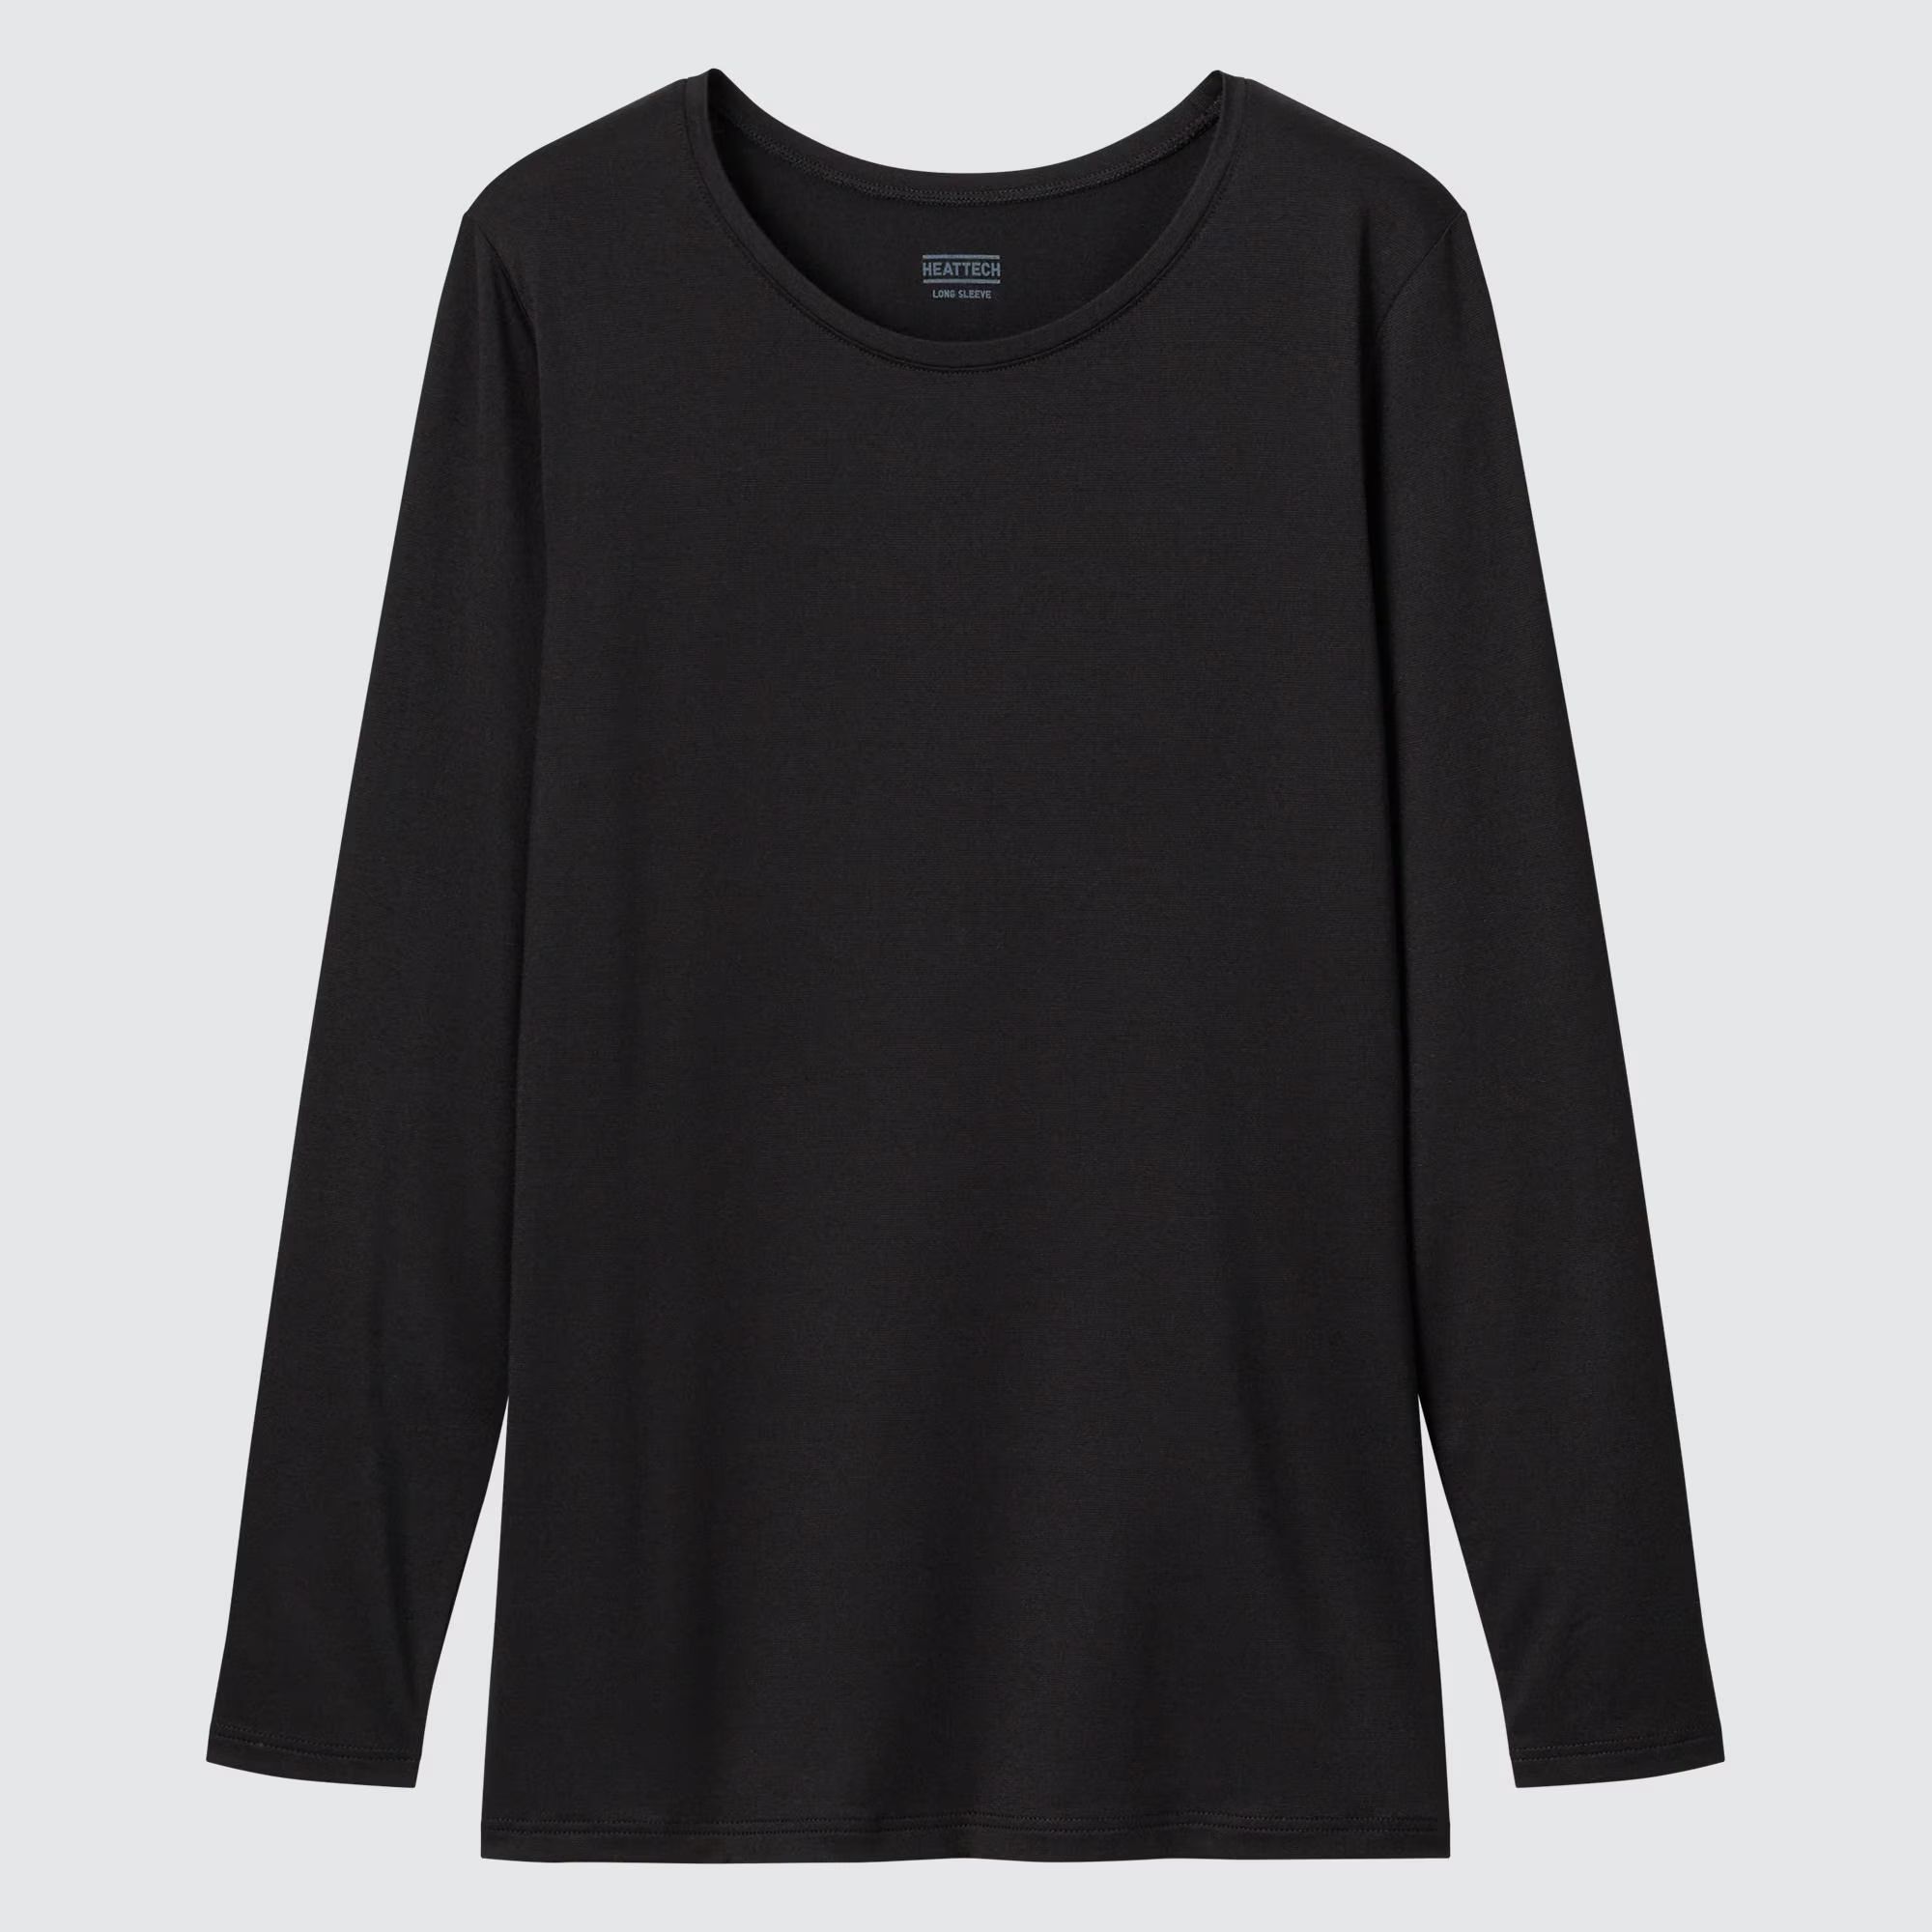 HEATTECH Crew Neck Long-Sleeve T-Shirt4.7(7)Updated with a more opaque and stylish texture. The f... | UNIQLO (US)